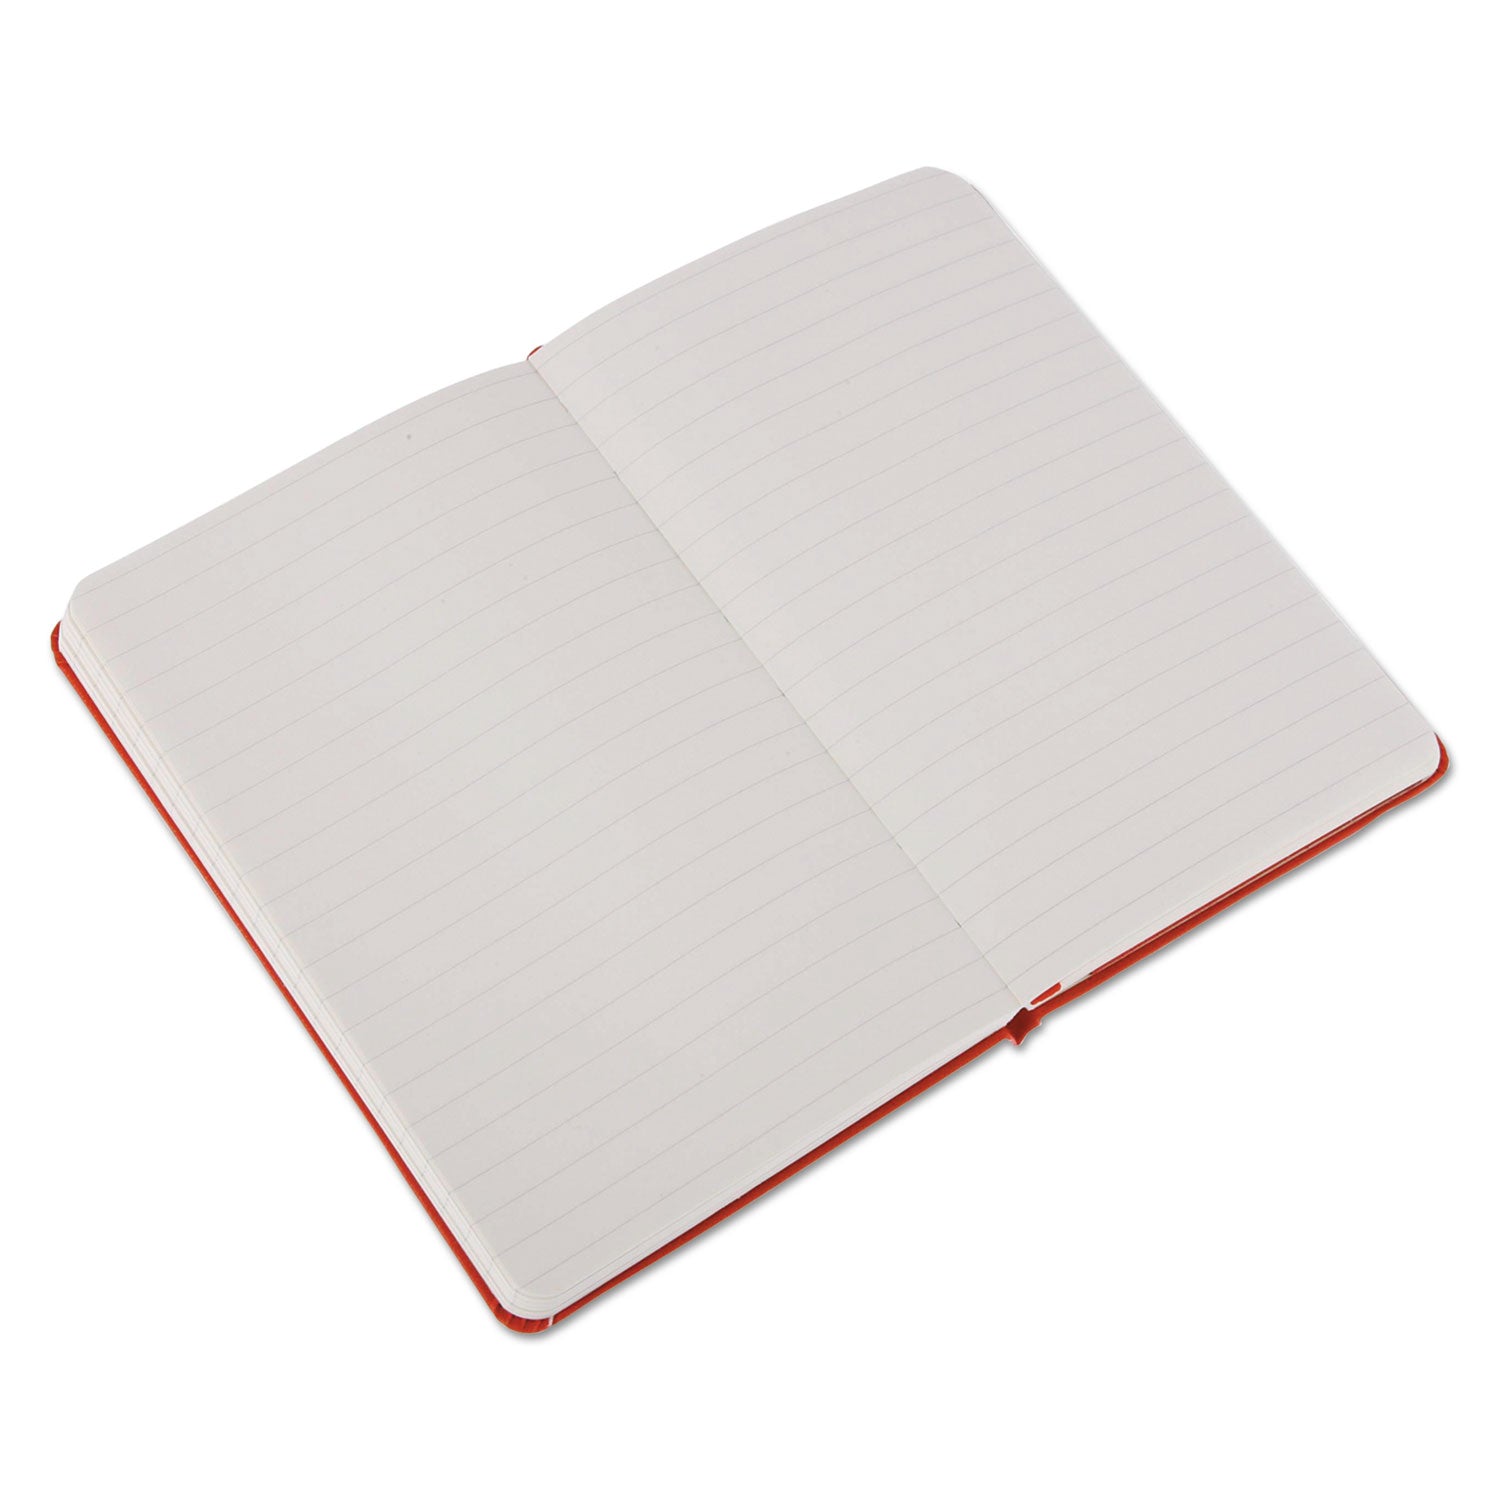 Hard Cover Notebook, 1-Subject, Narrow Rule, Red Cover, (192) 5.5 x 3.5 Sheets - 